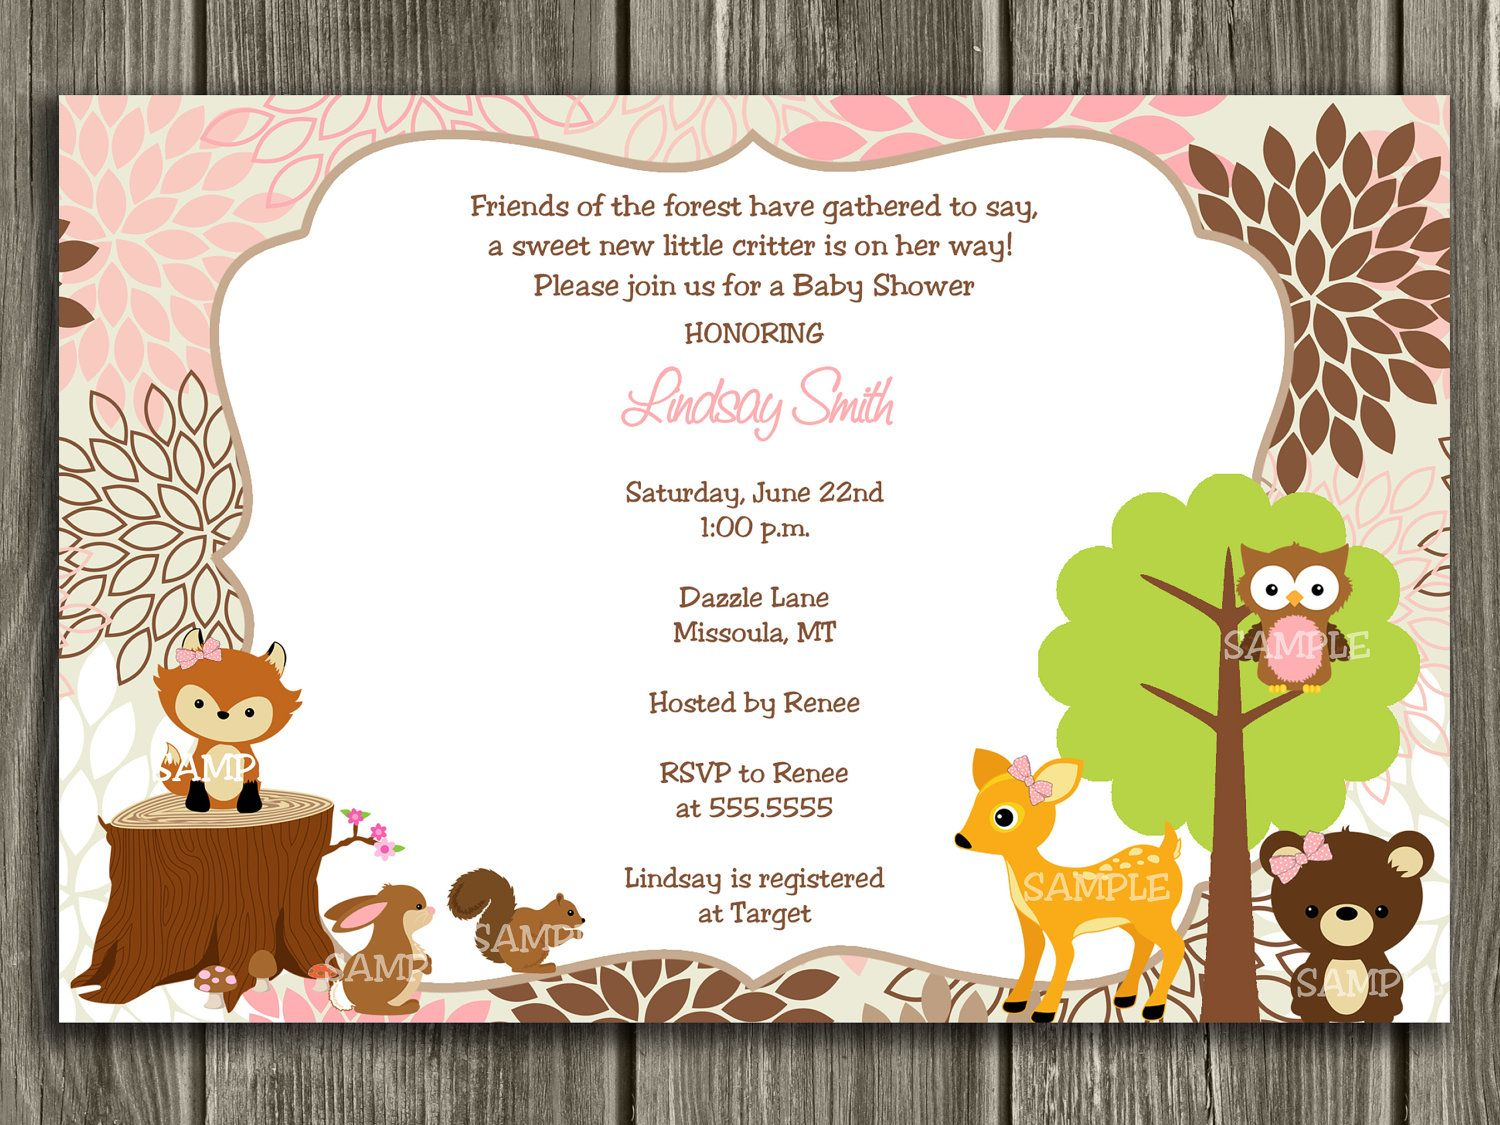 Woodland Baby Shower Invitation FREE Thank You Card Included 15 00 